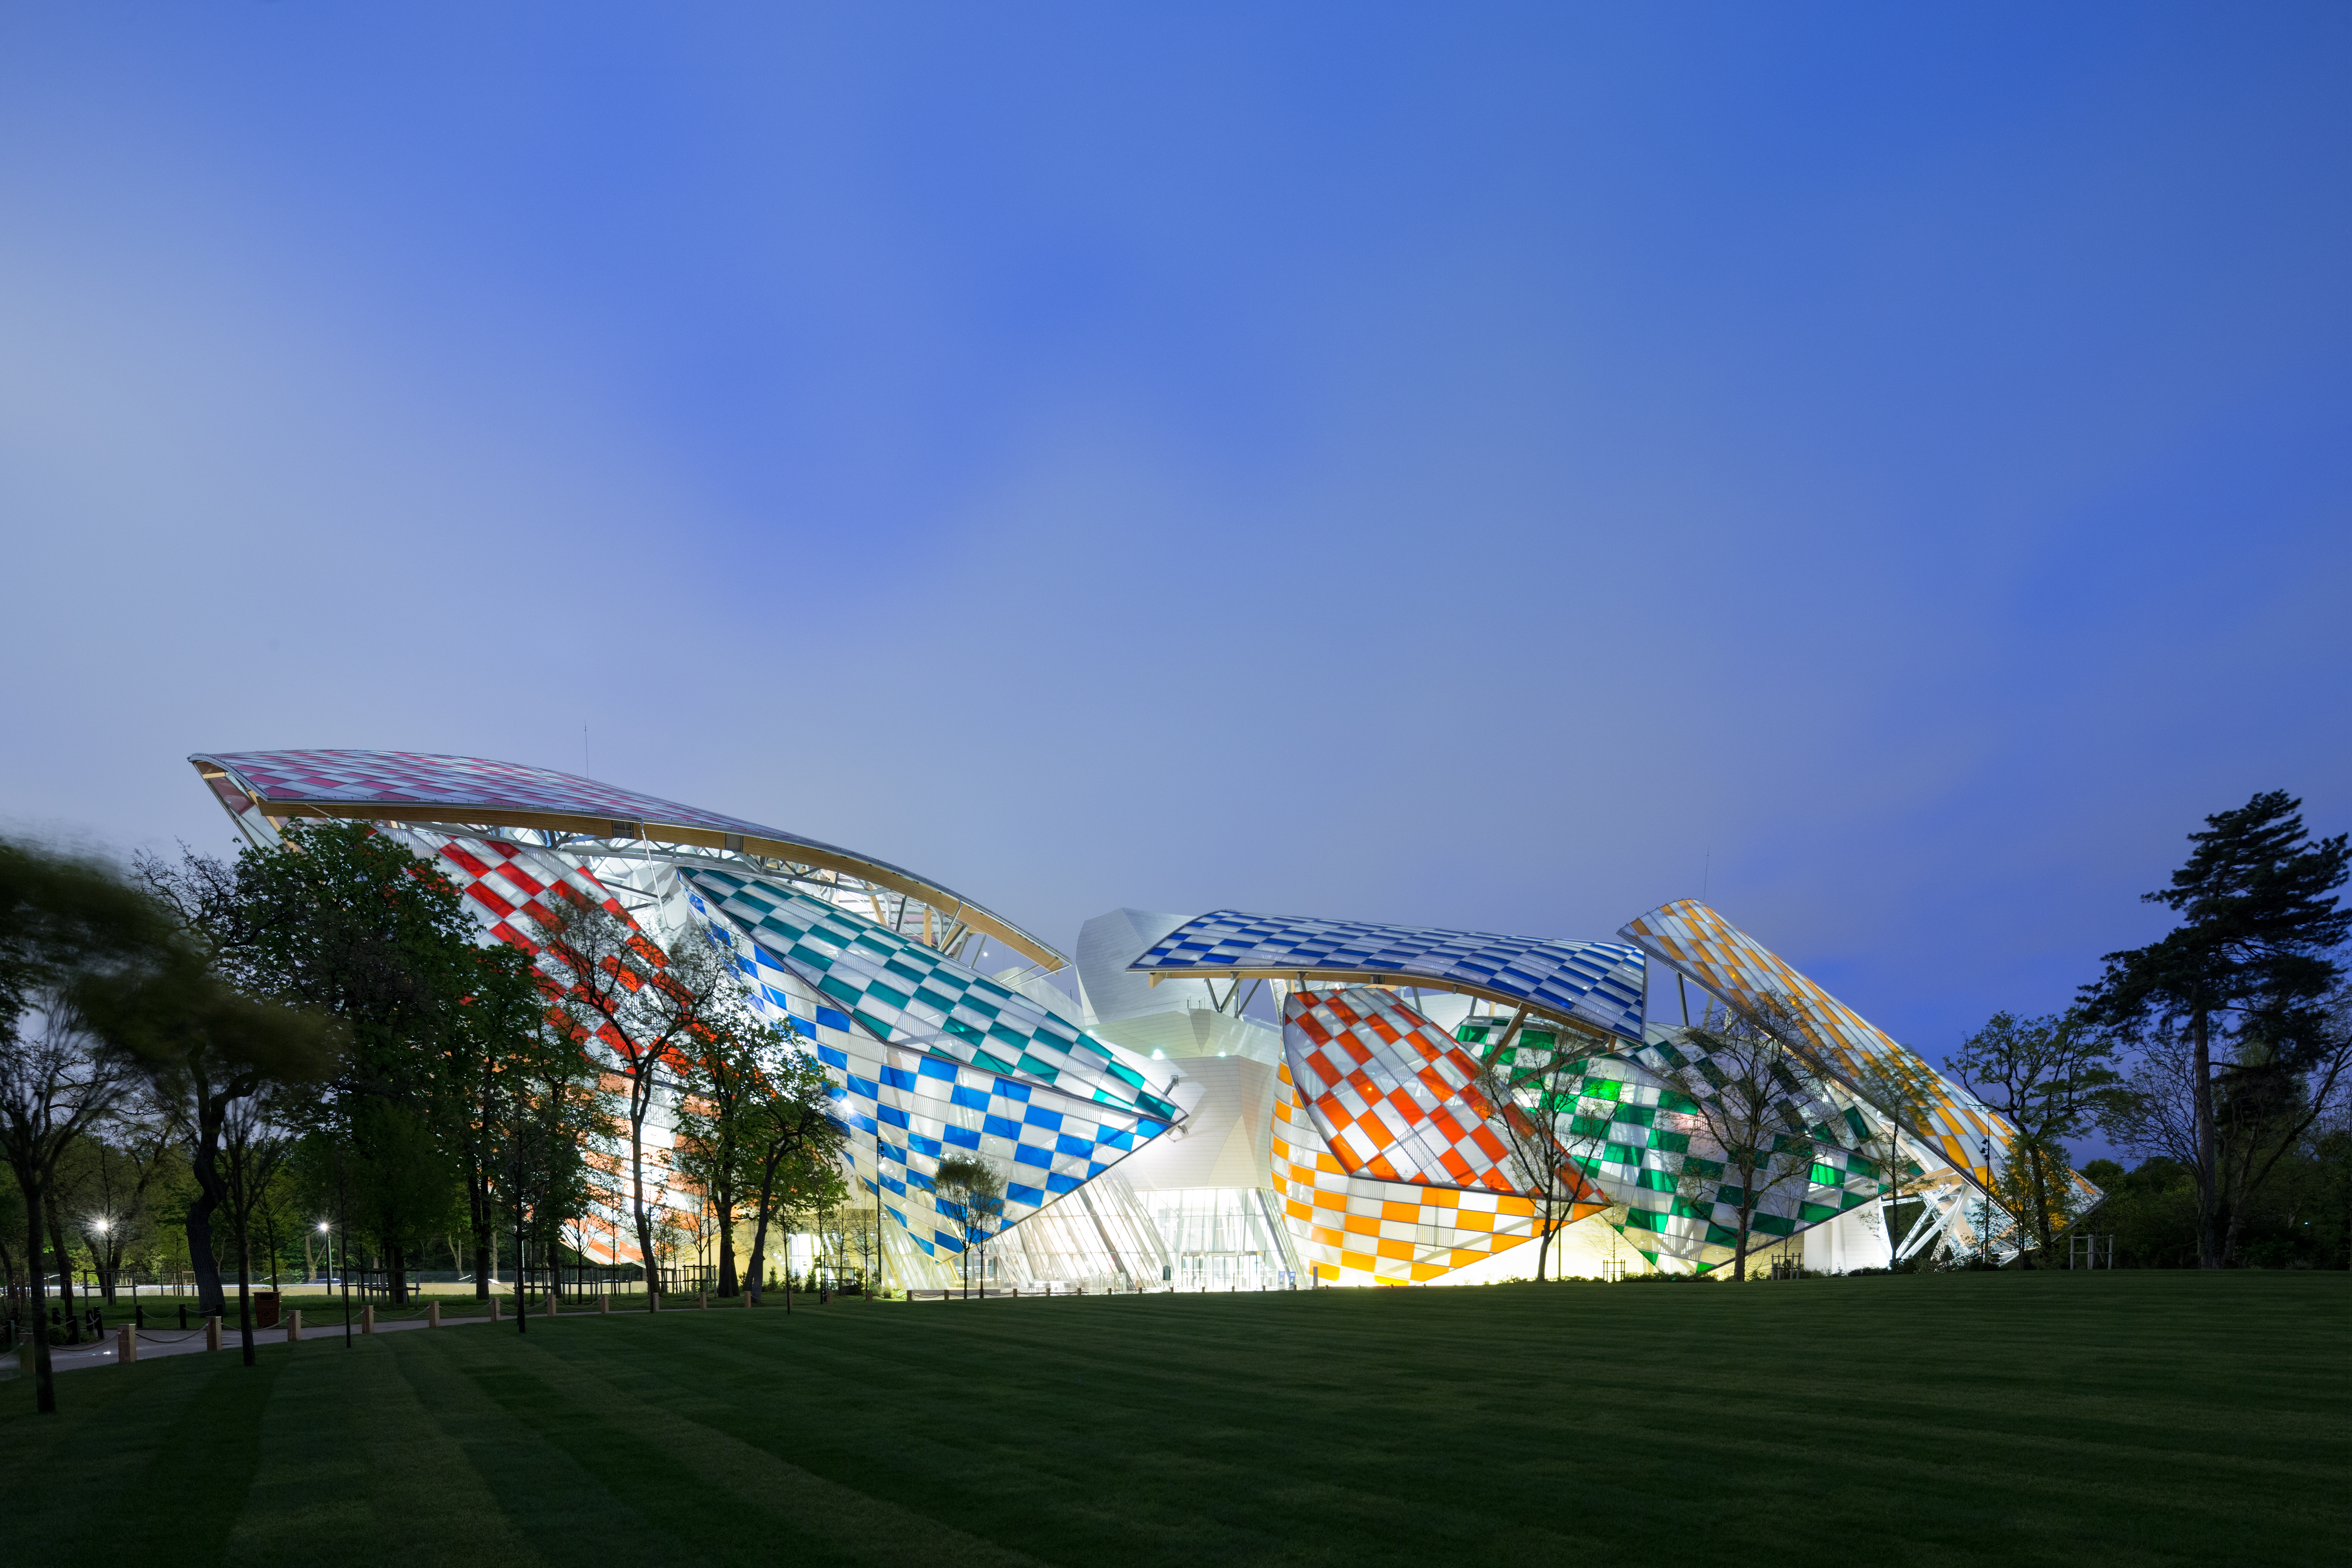 The Observatory of Light at the Fondation Louis Vuitton - www.cinemas93.org